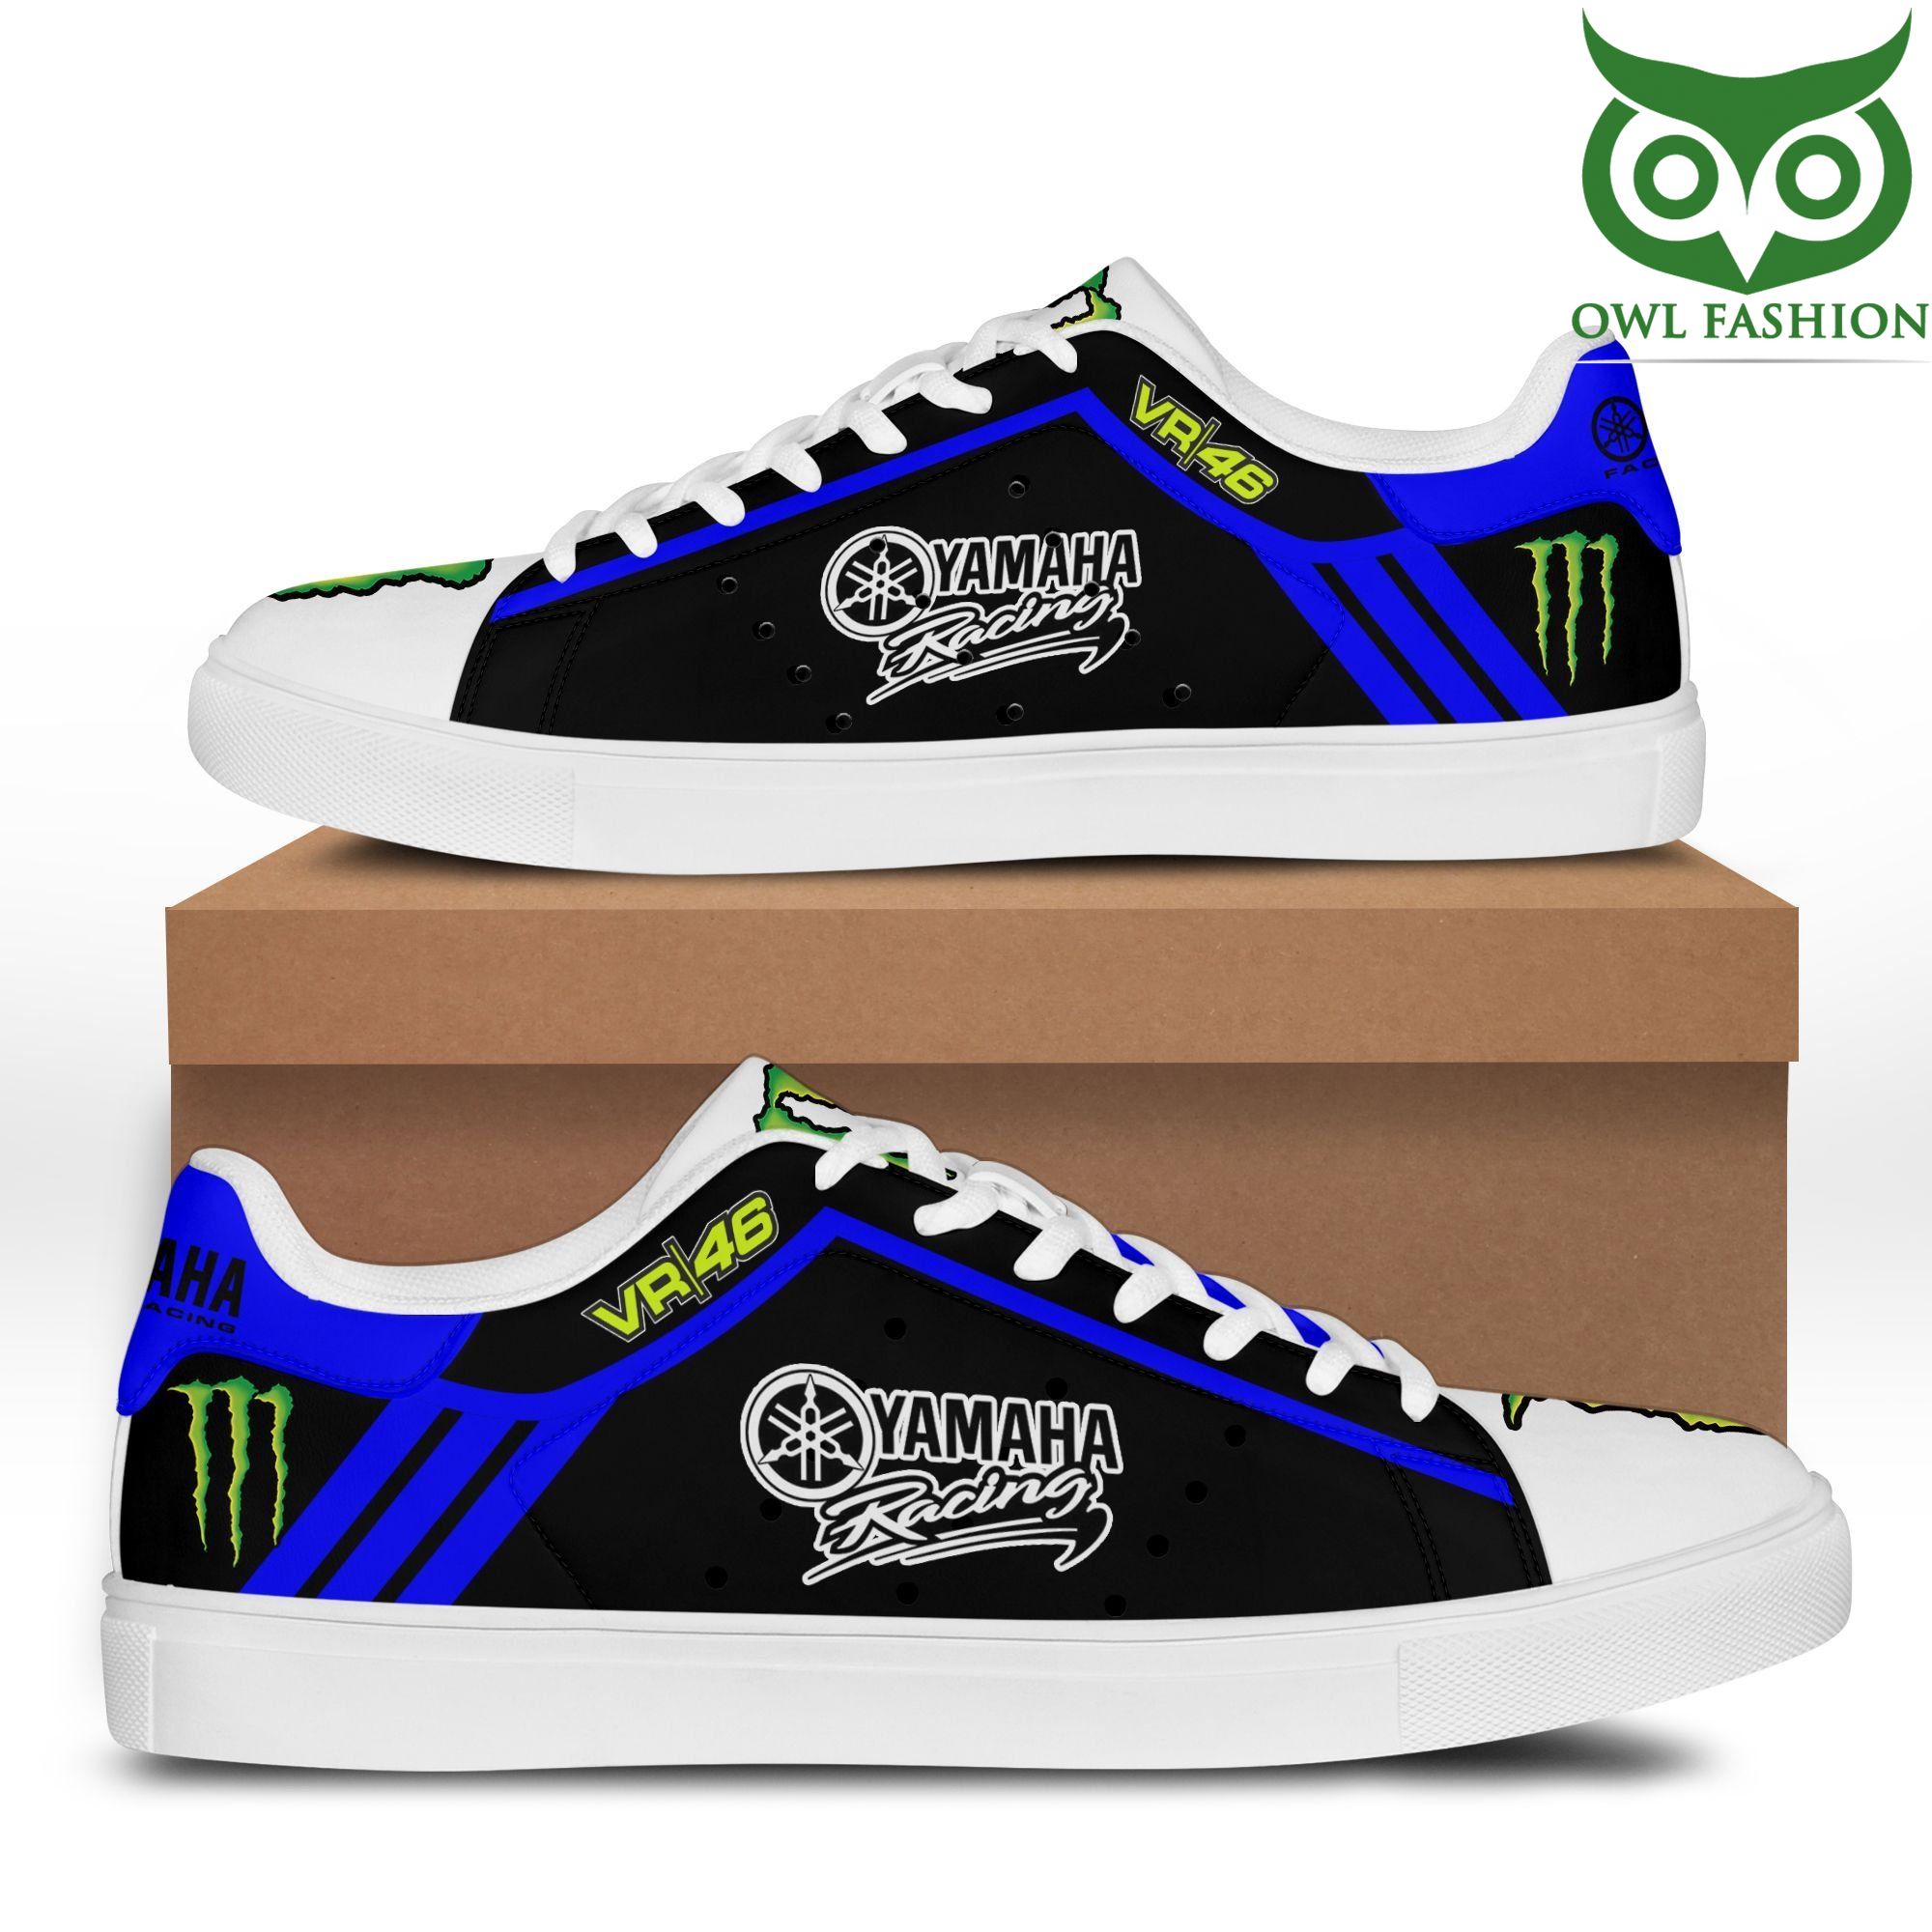 Yamaha Racing VR 46 Blue line in Black Stan Smith Shoes